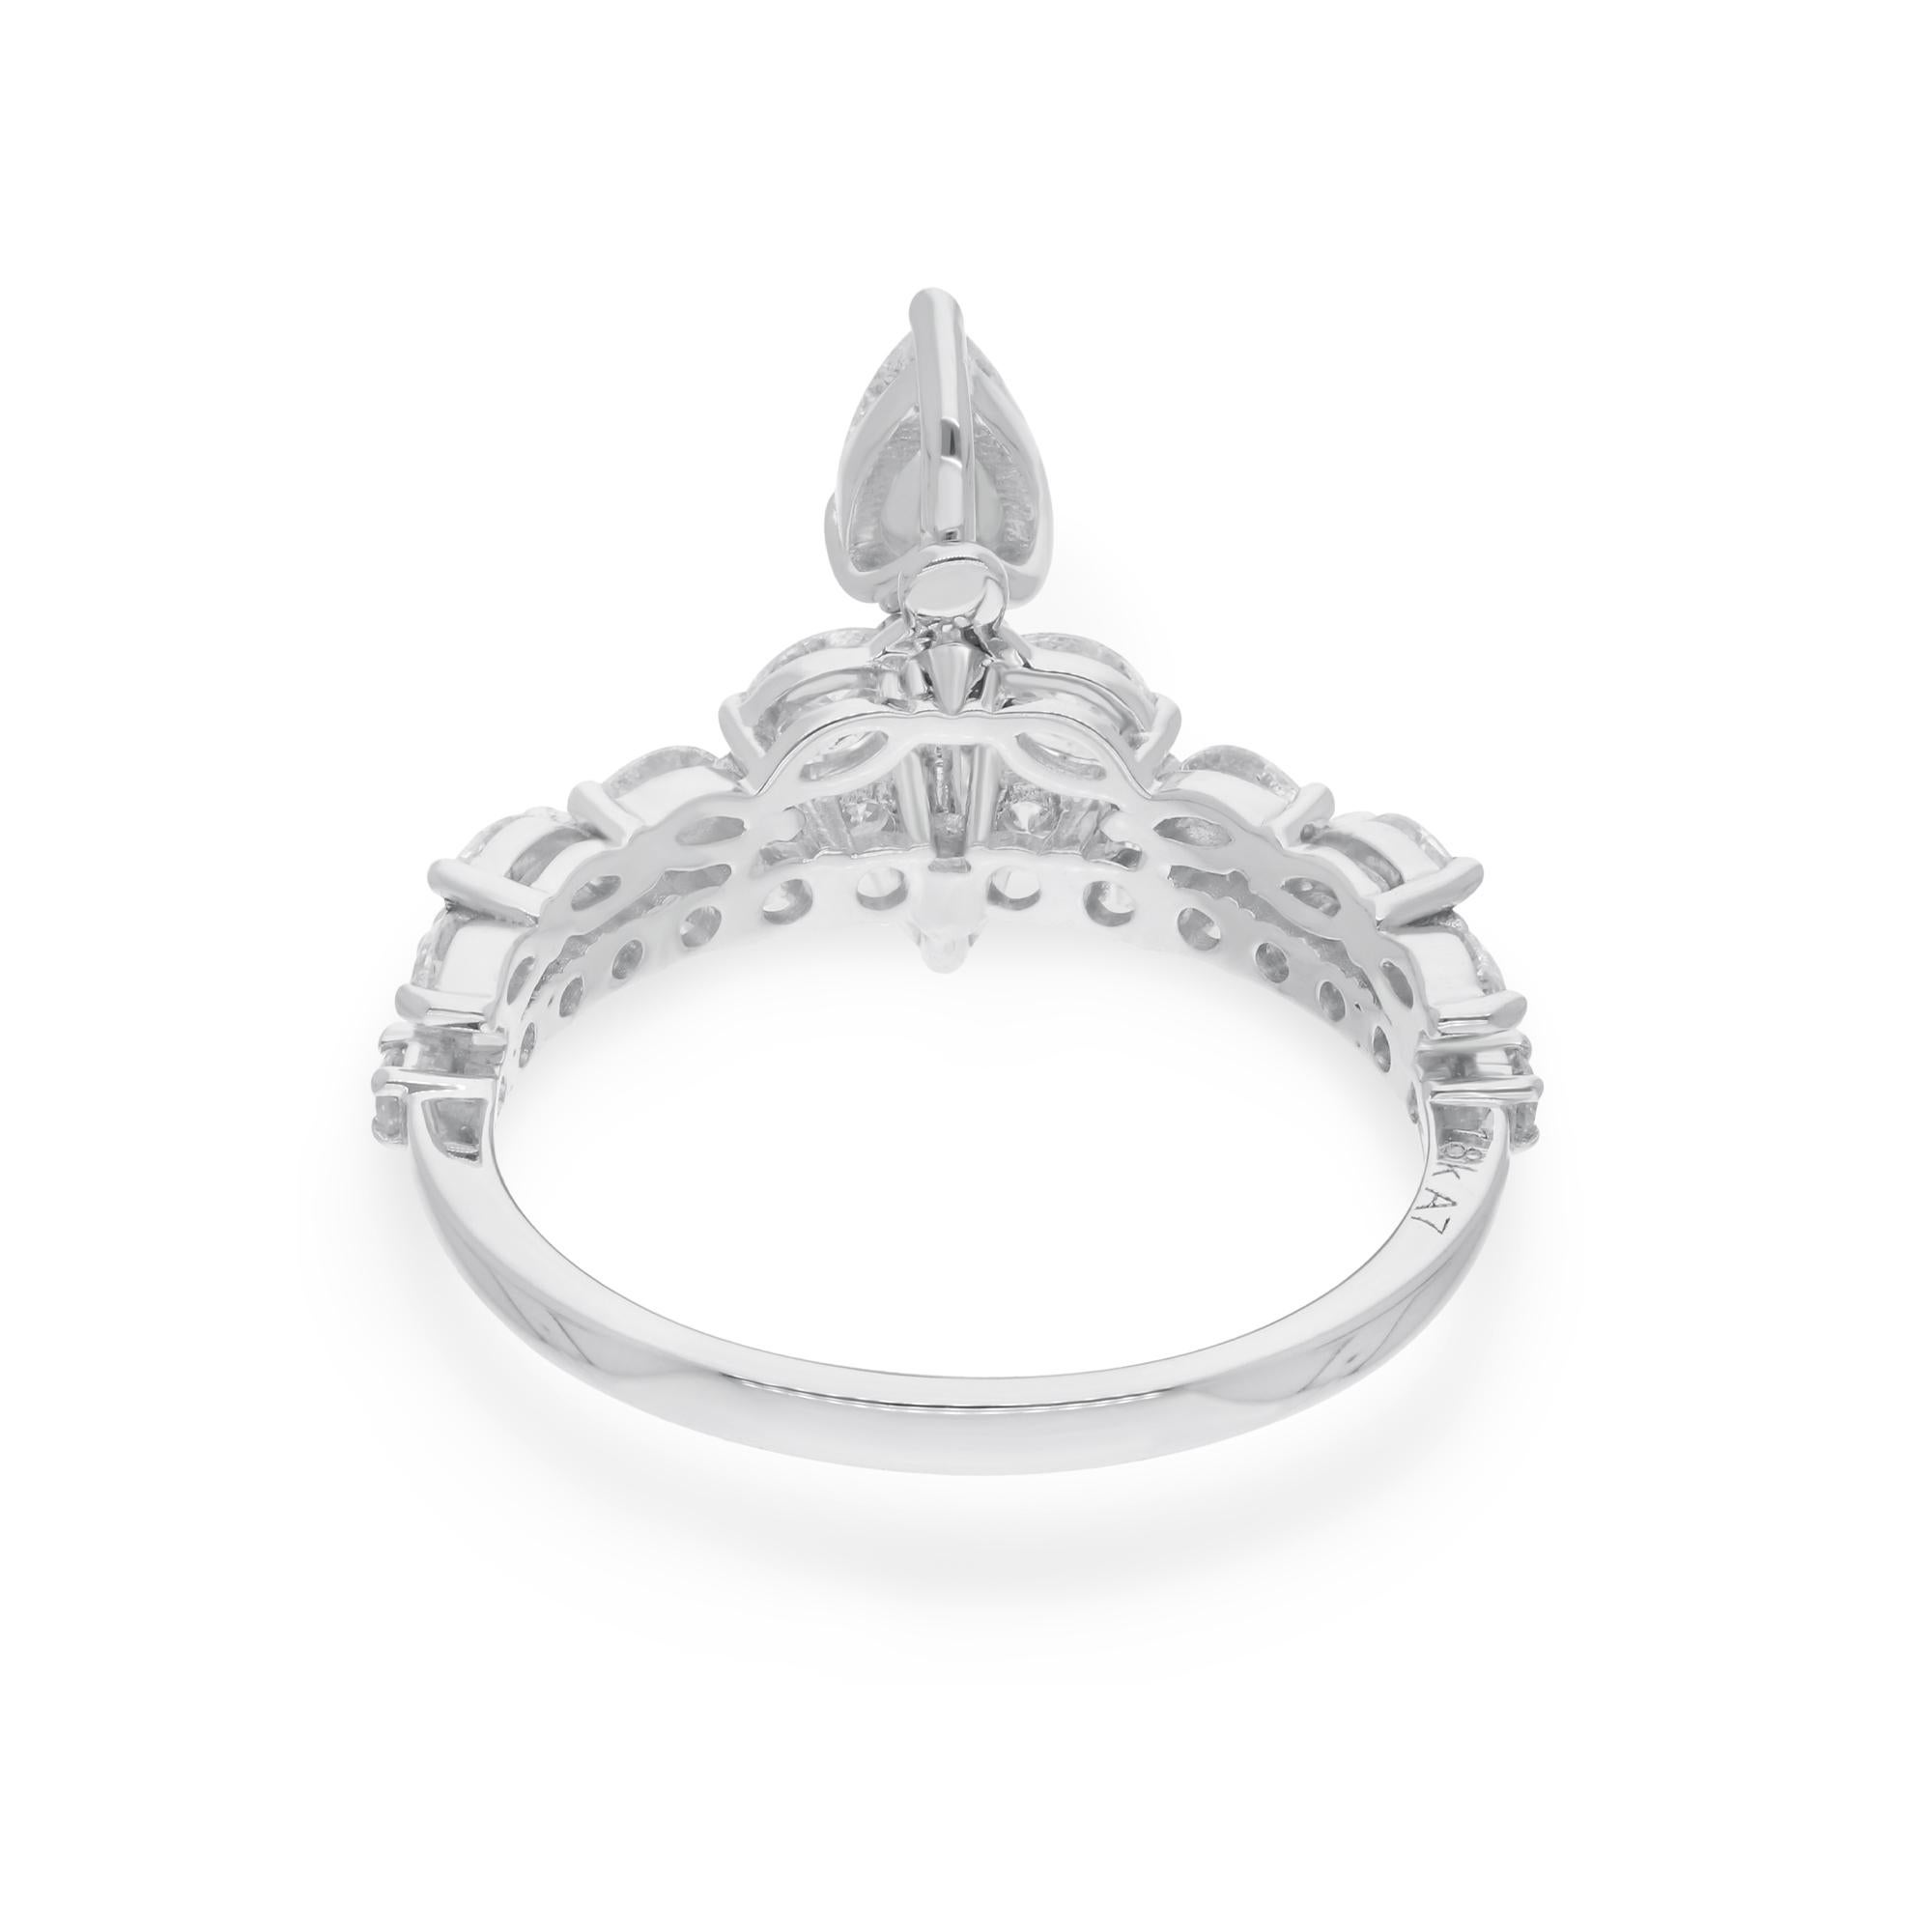 Celebrate the eternal bond of love with this breathtaking Pear Marquise & Round Diamond Wedding Ring, a masterpiece of artisanal craftsmanship handcrafted in luxurious 14 karat white gold. Designed to symbolize the everlasting commitment and